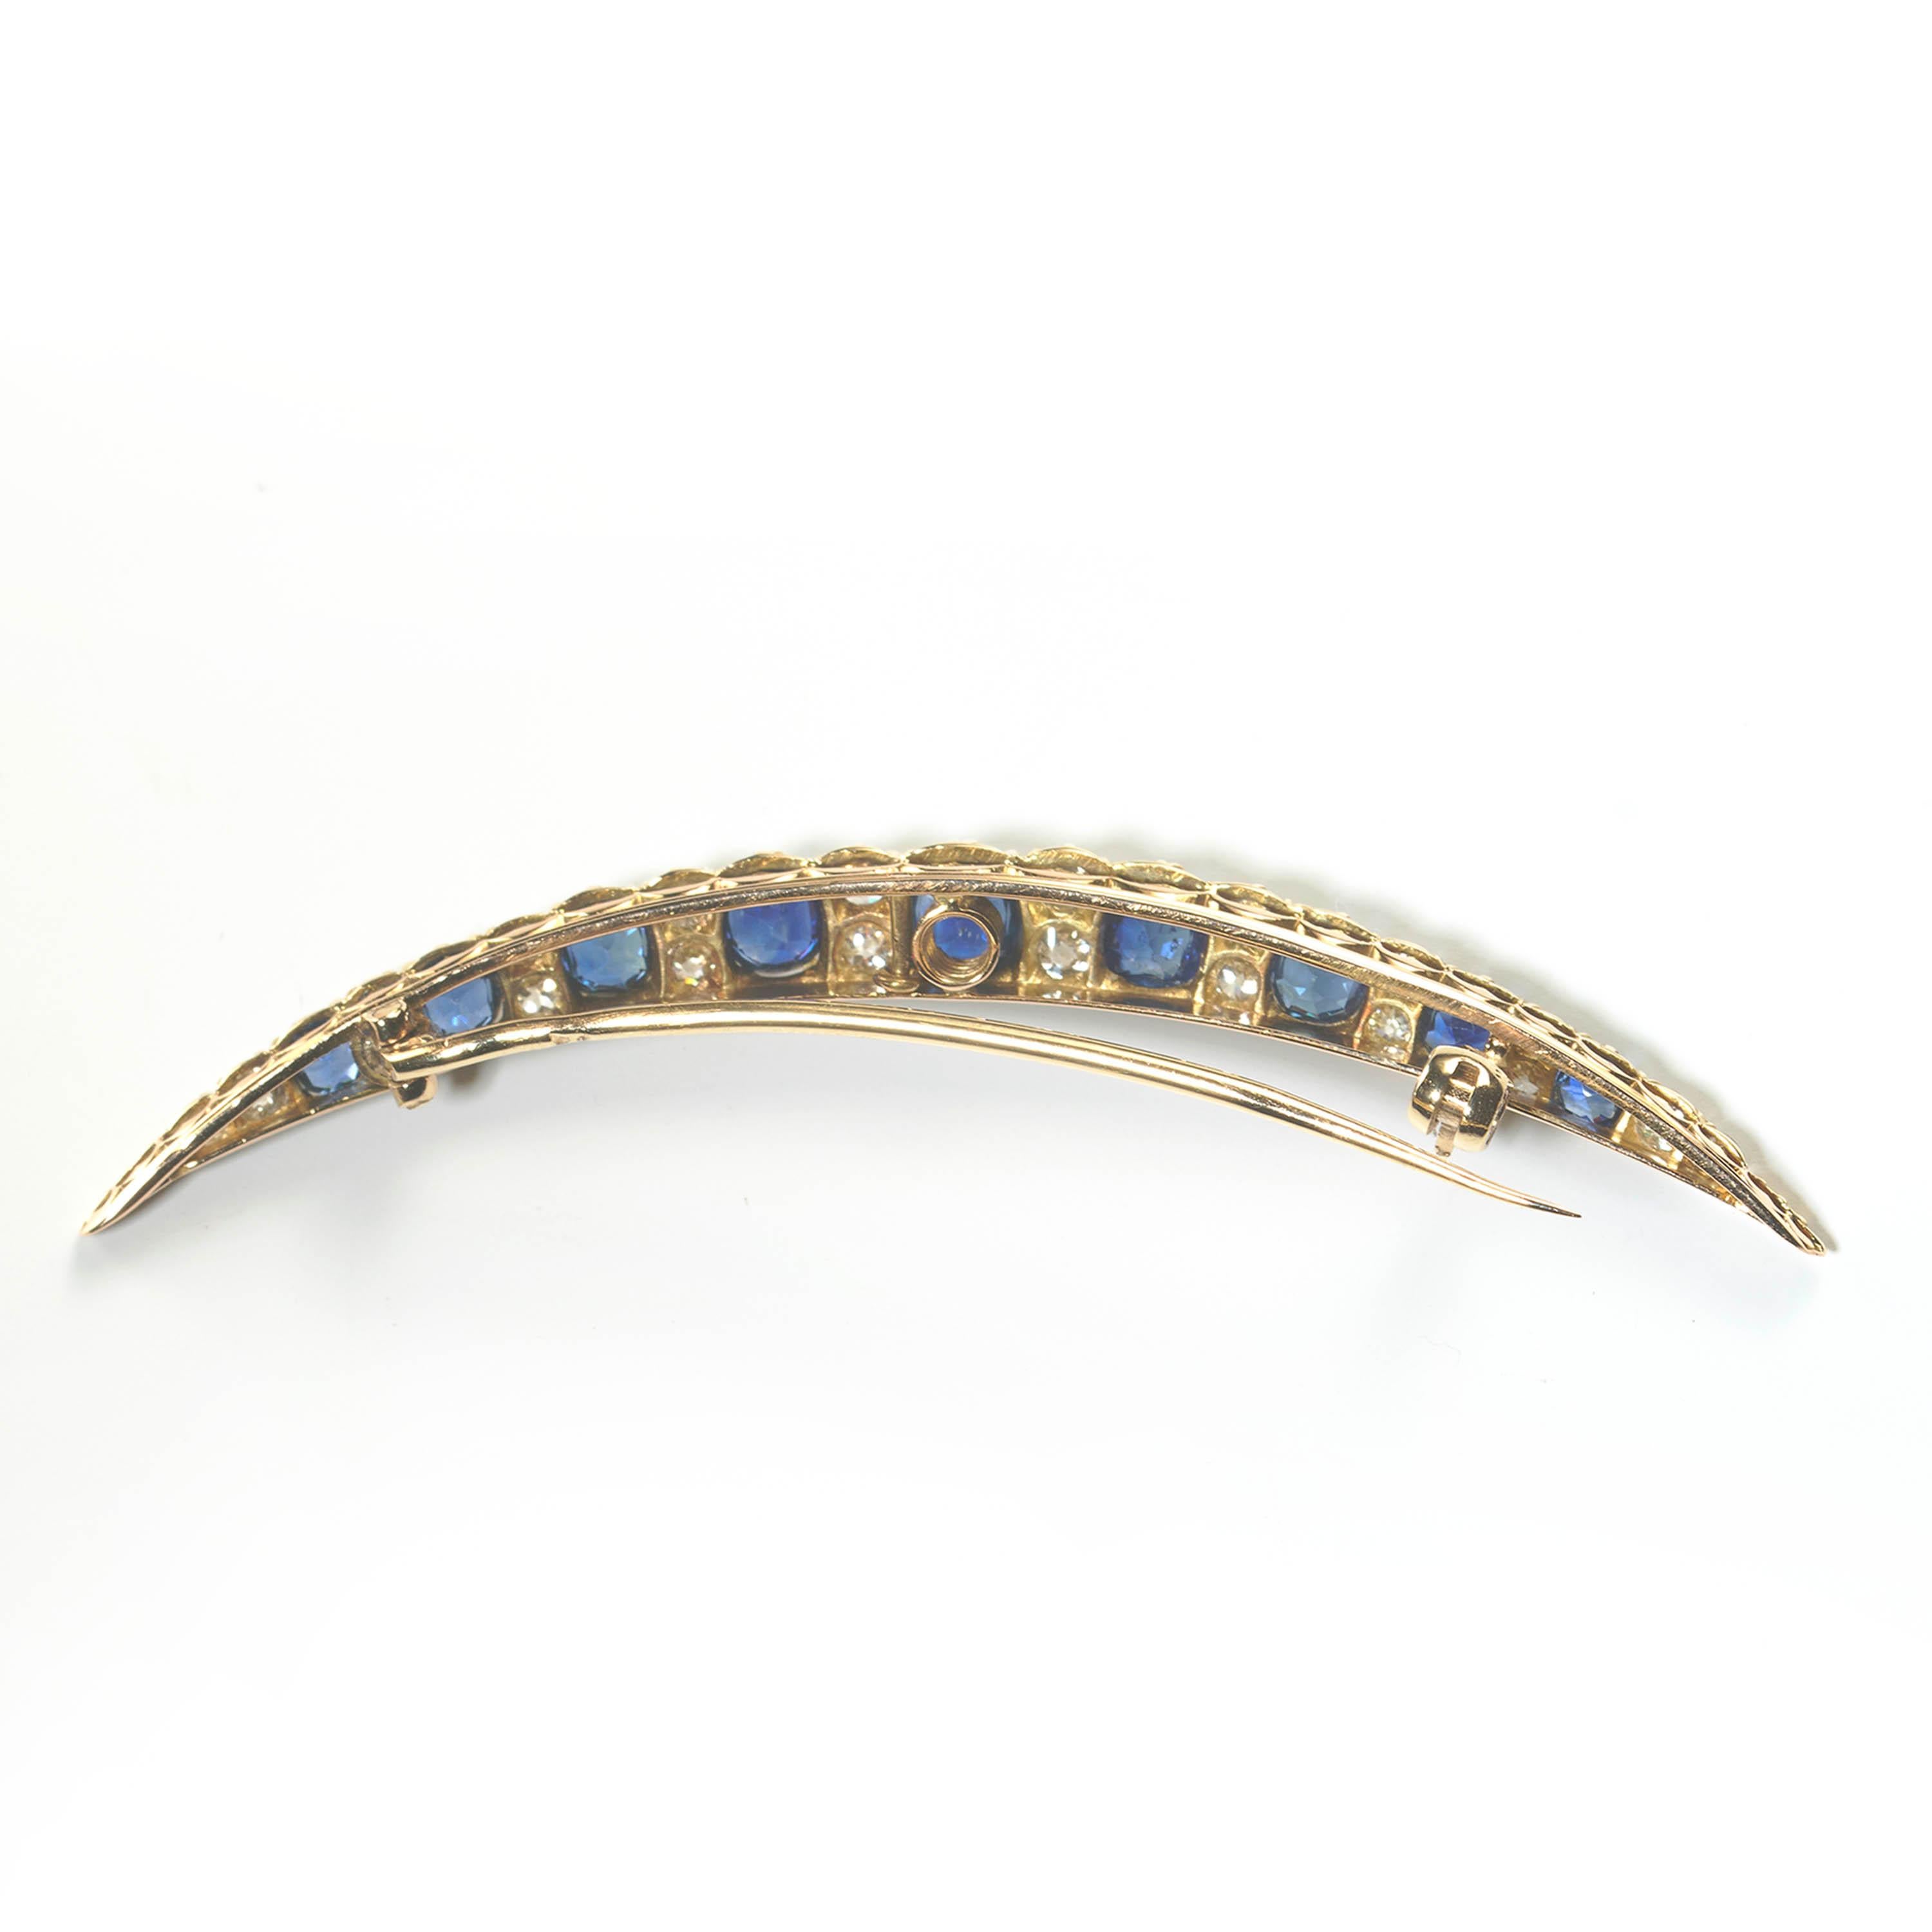 Late Victorian Antique Sapphire, Diamond and Gold Crescent Brooch, Circa 1890 For Sale